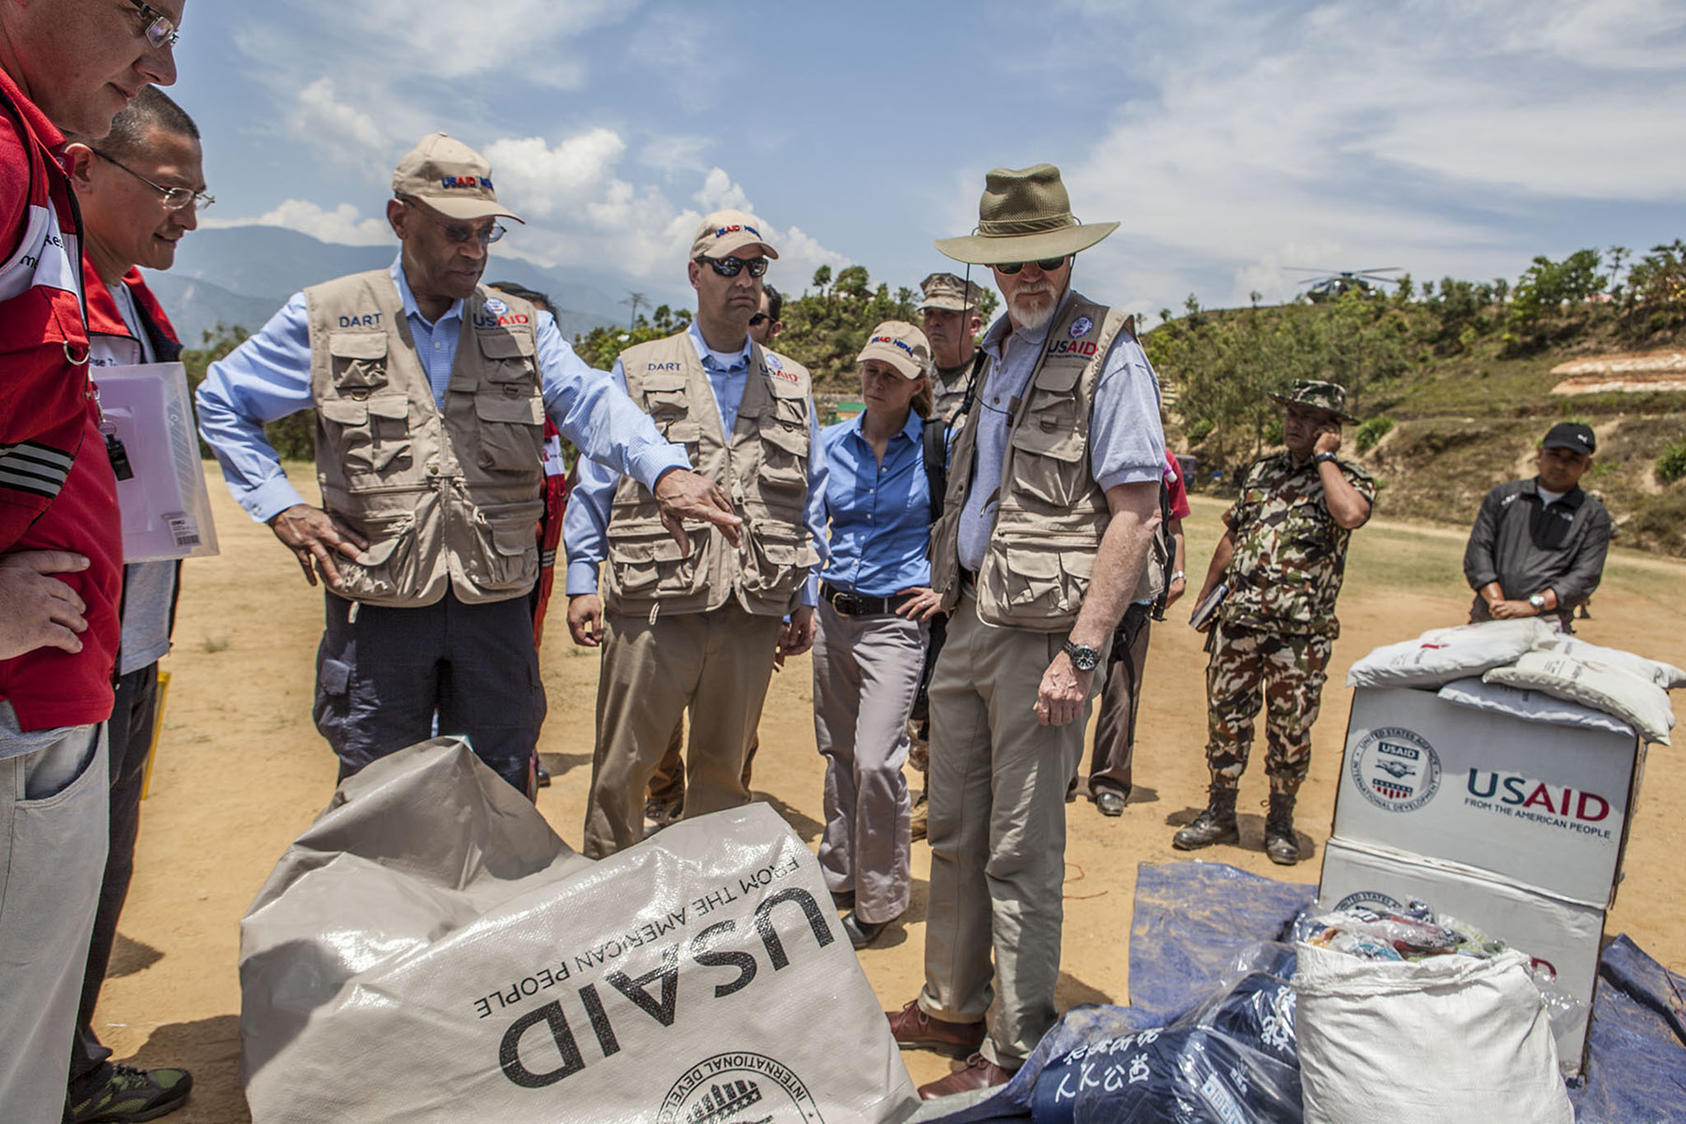 USAID staff are briefed during a visit to Nepal in the wake of a devastating 2015 earthquake. (USAID/Flickr)